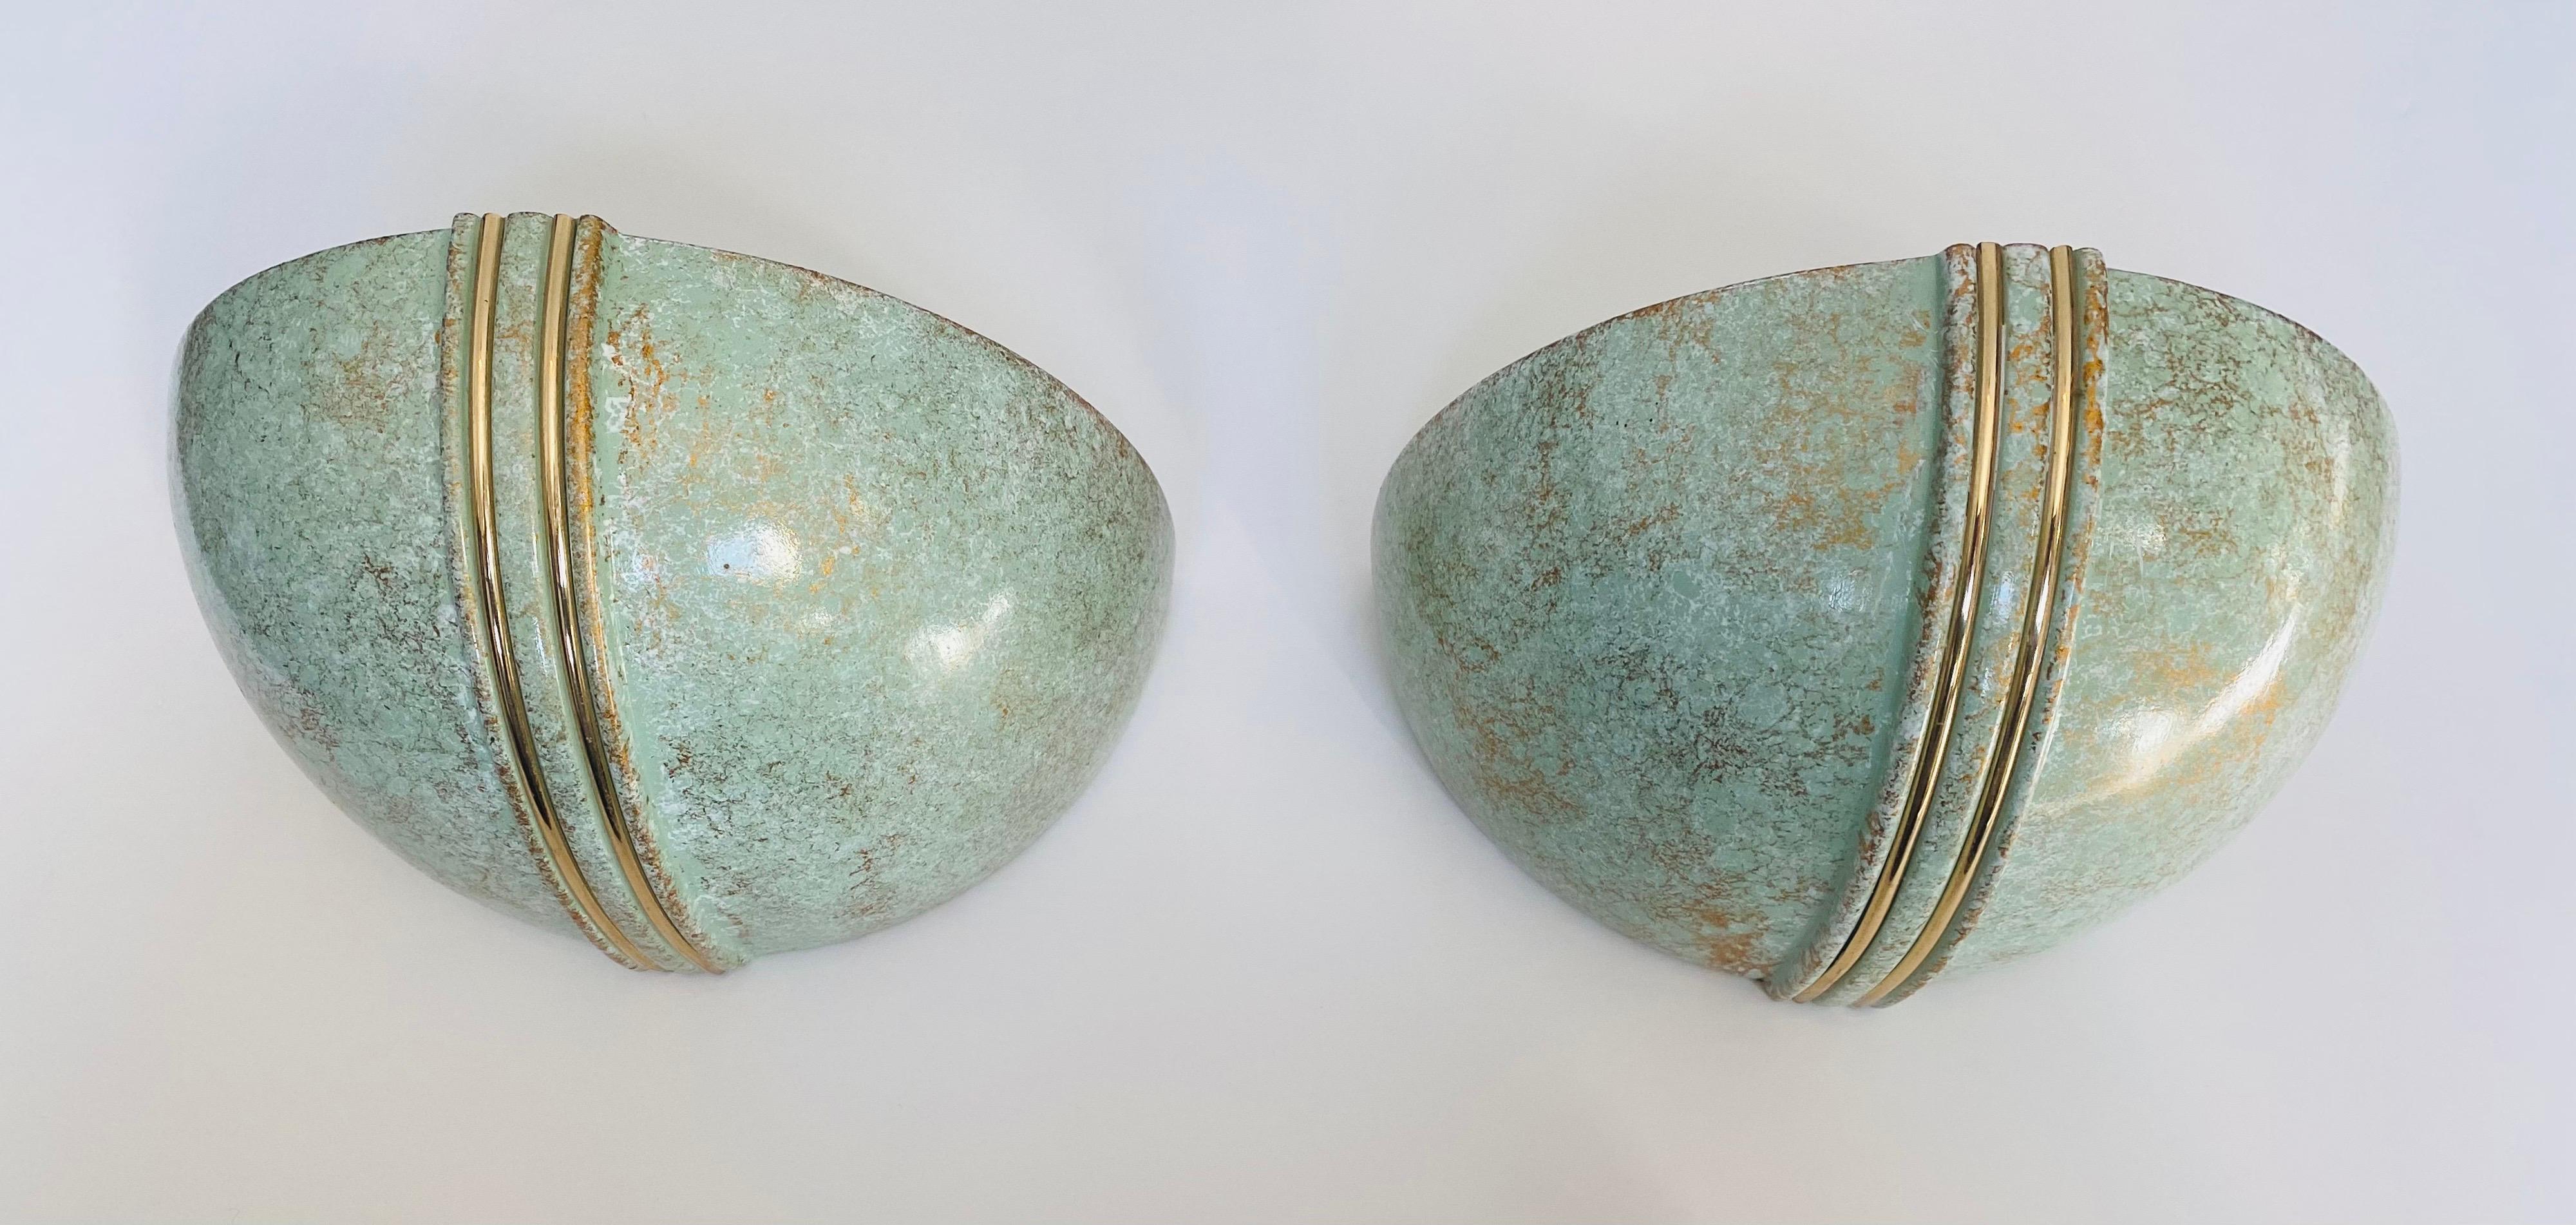 Pair of French 1980s Ceramic Verdigris Demilune Wall Lights Uplight Sconces For Sale 6